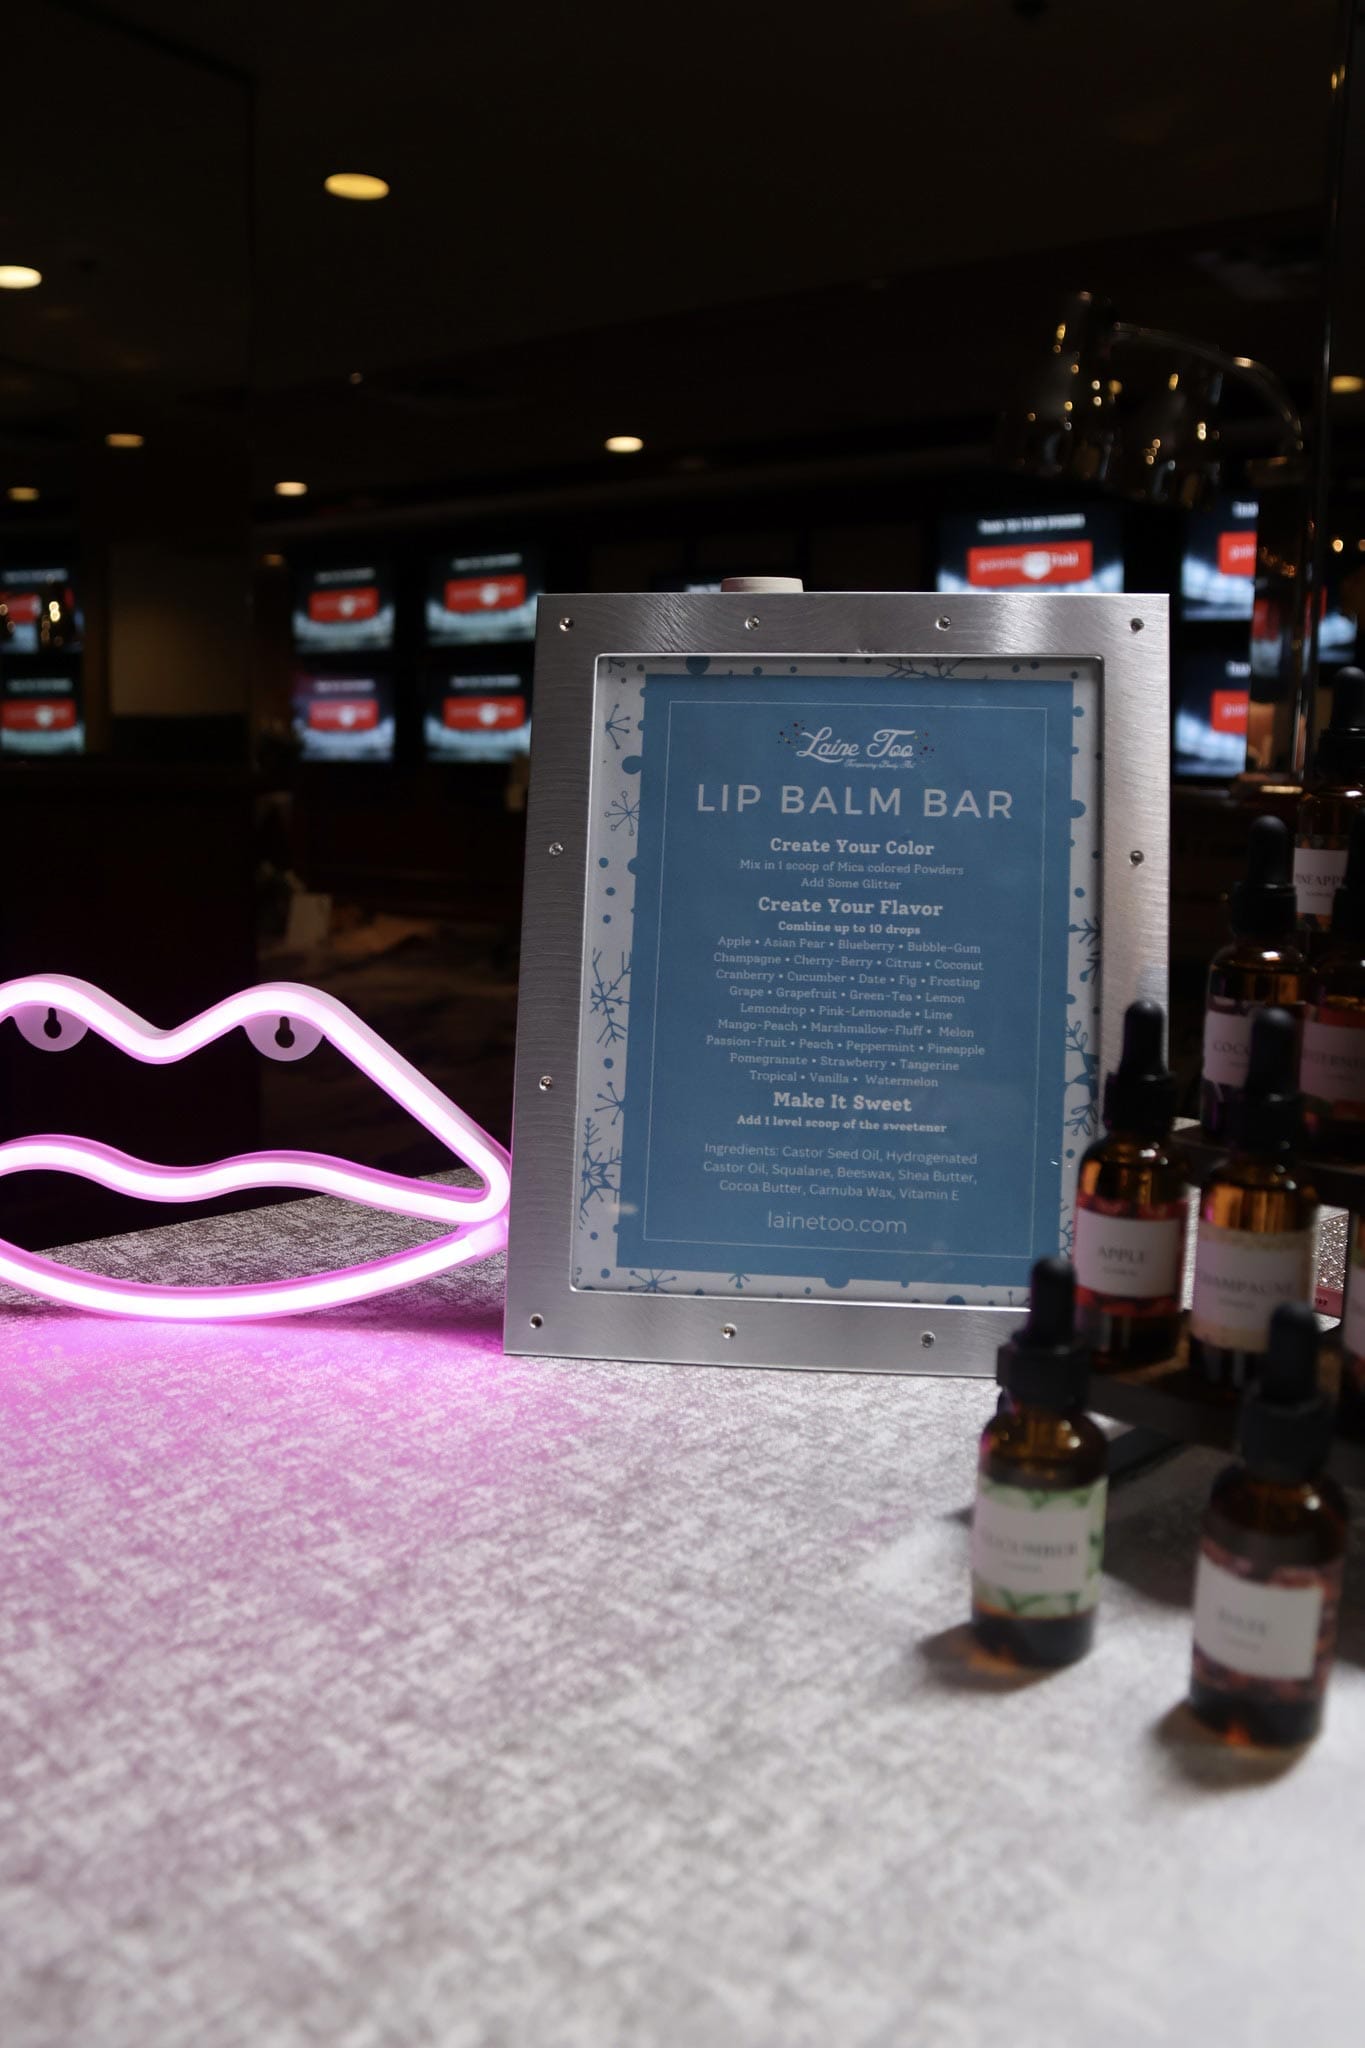 A tabletop display featuring a sign for a "lip balm bar" where customers can create their own lip balm flavors, accompanied by various bottles of ingredients.